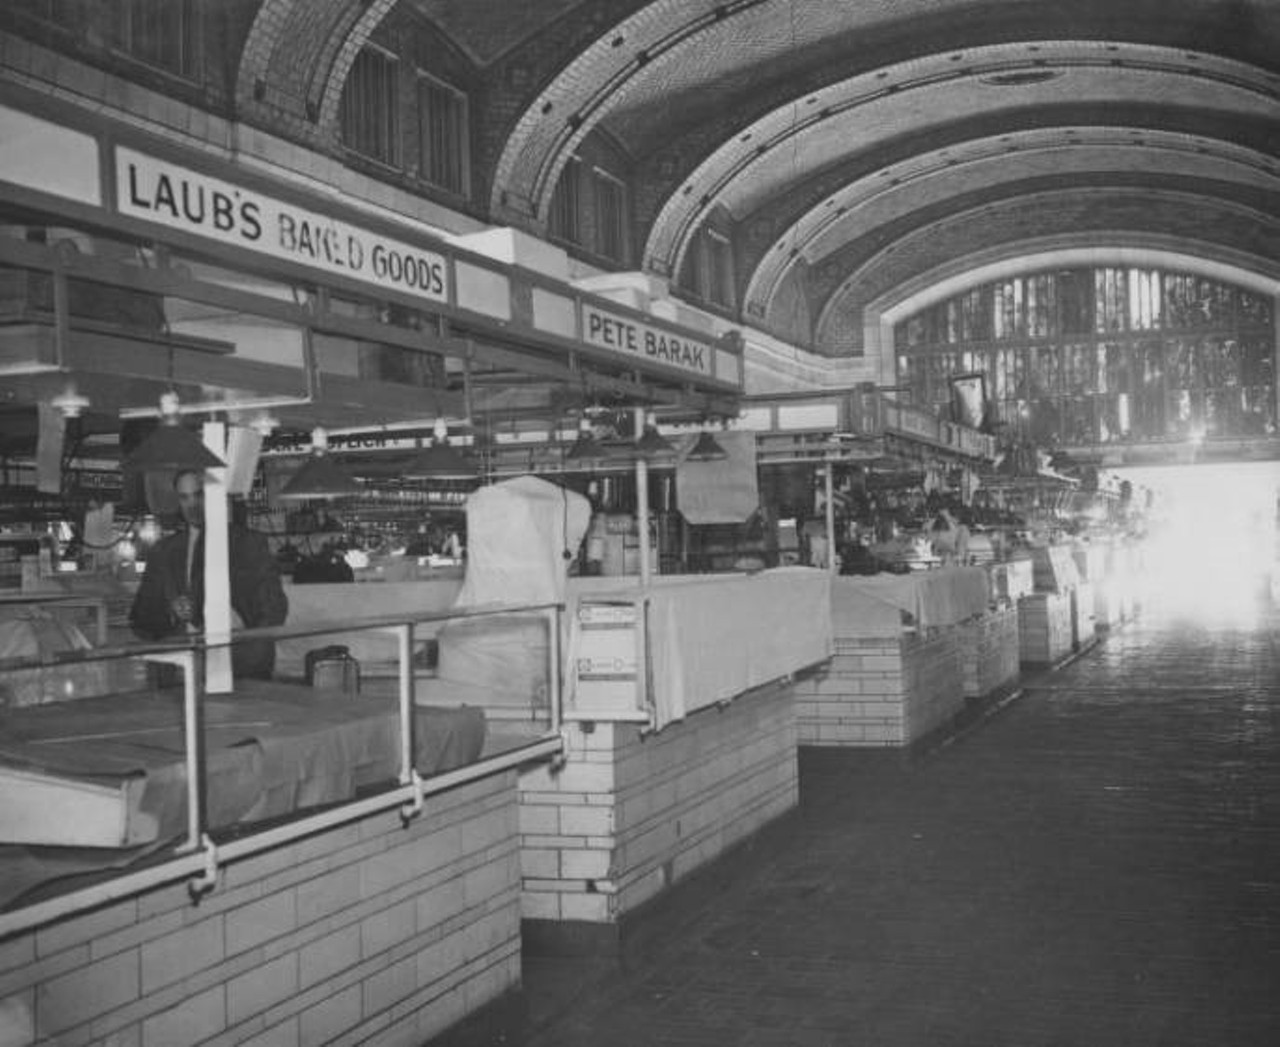 Interior view while market is closed. Signs visible for Laub's baked goods and Pete Barak. c. 1946